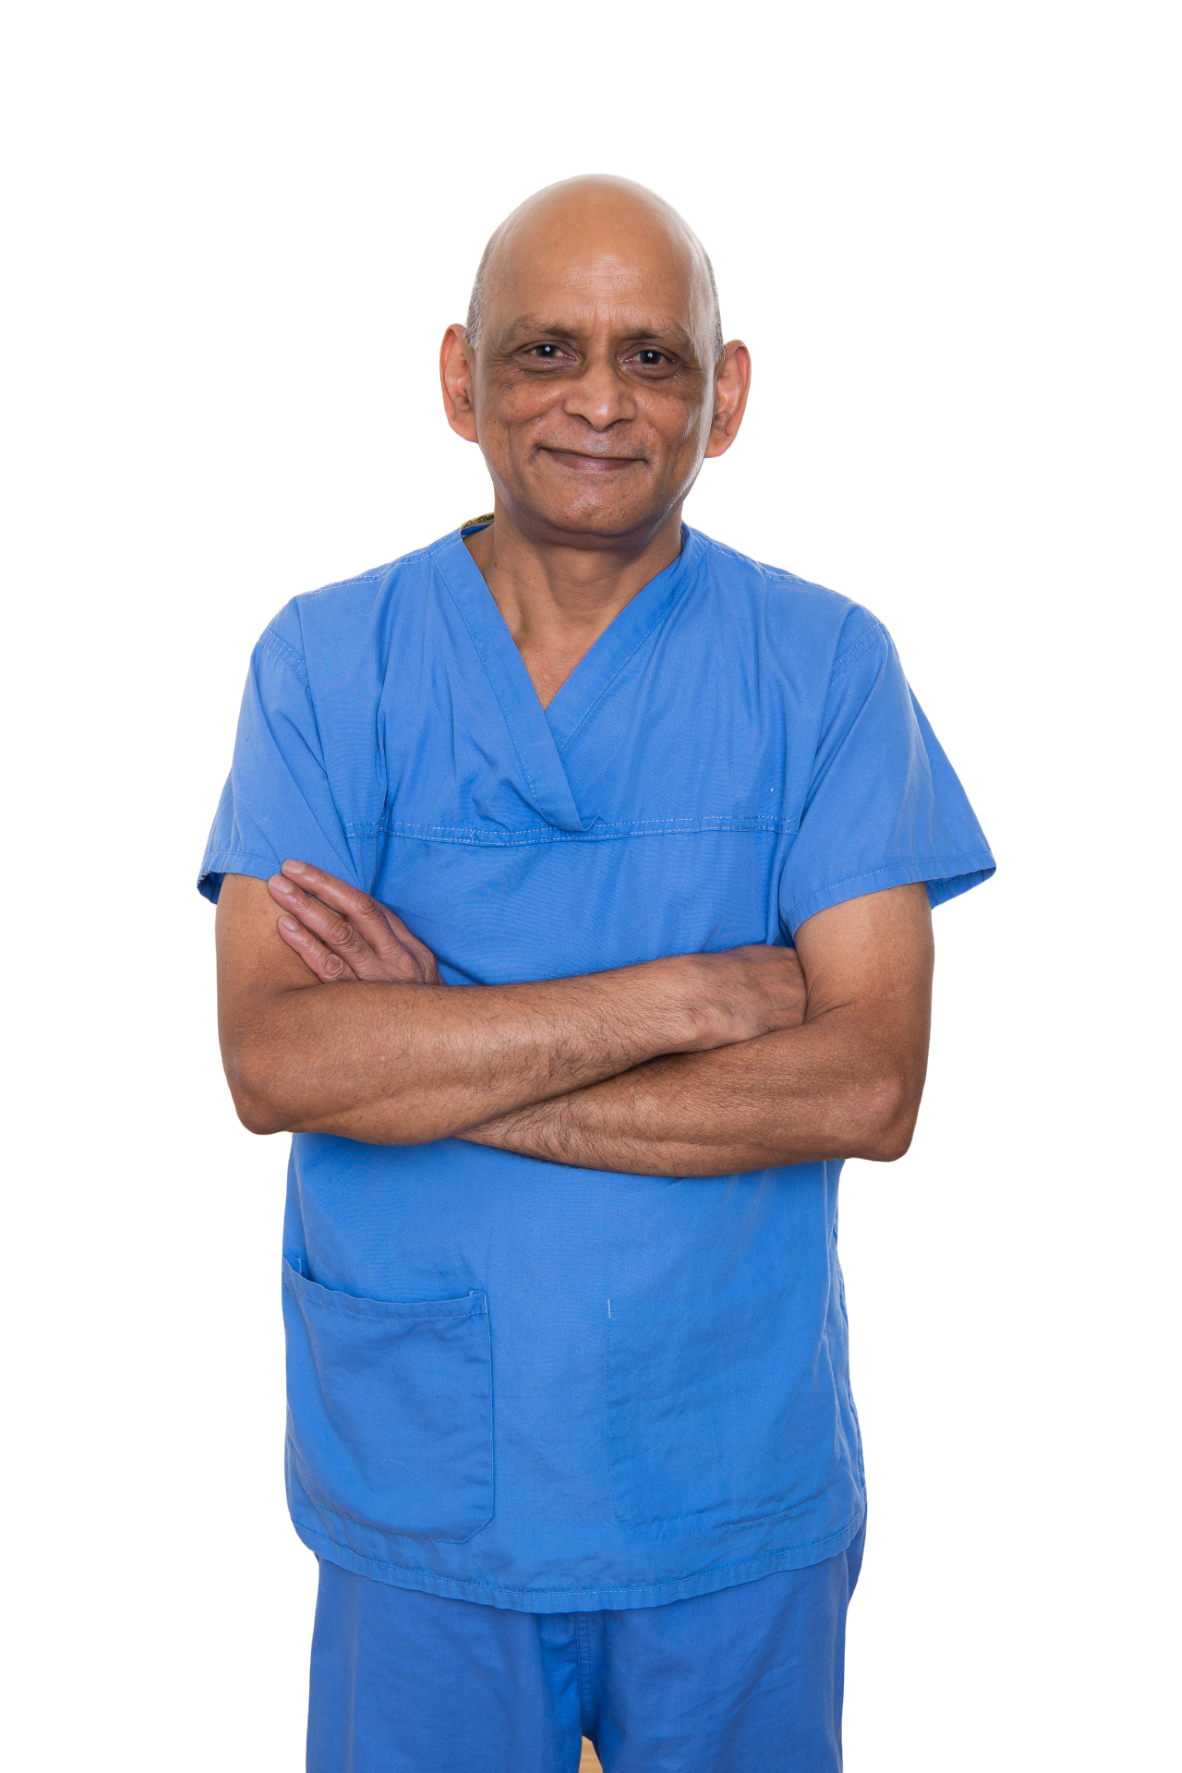 BAME, Male, Older Nurse in Community Uniform with Arms Folded